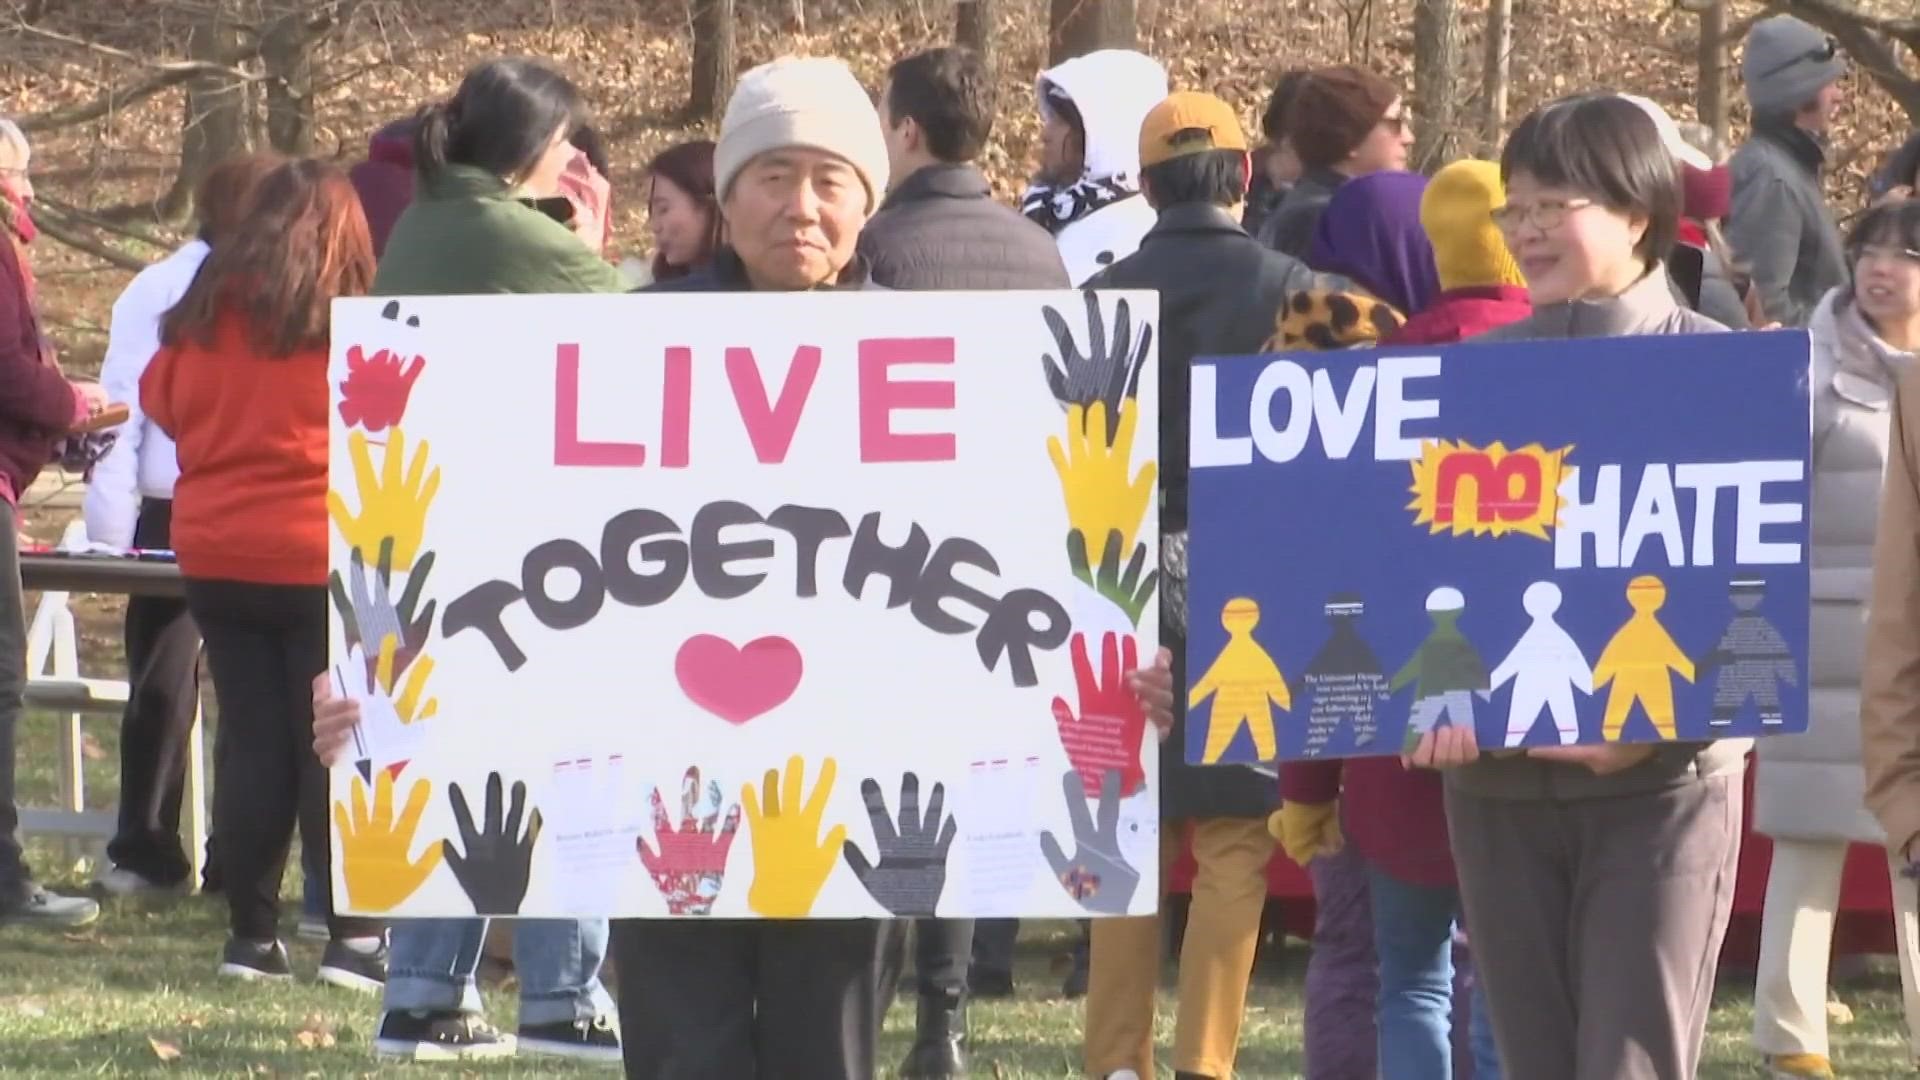 Students are now pushing for policy changes from the state and the university in the wake of an attack on an Asian American student.